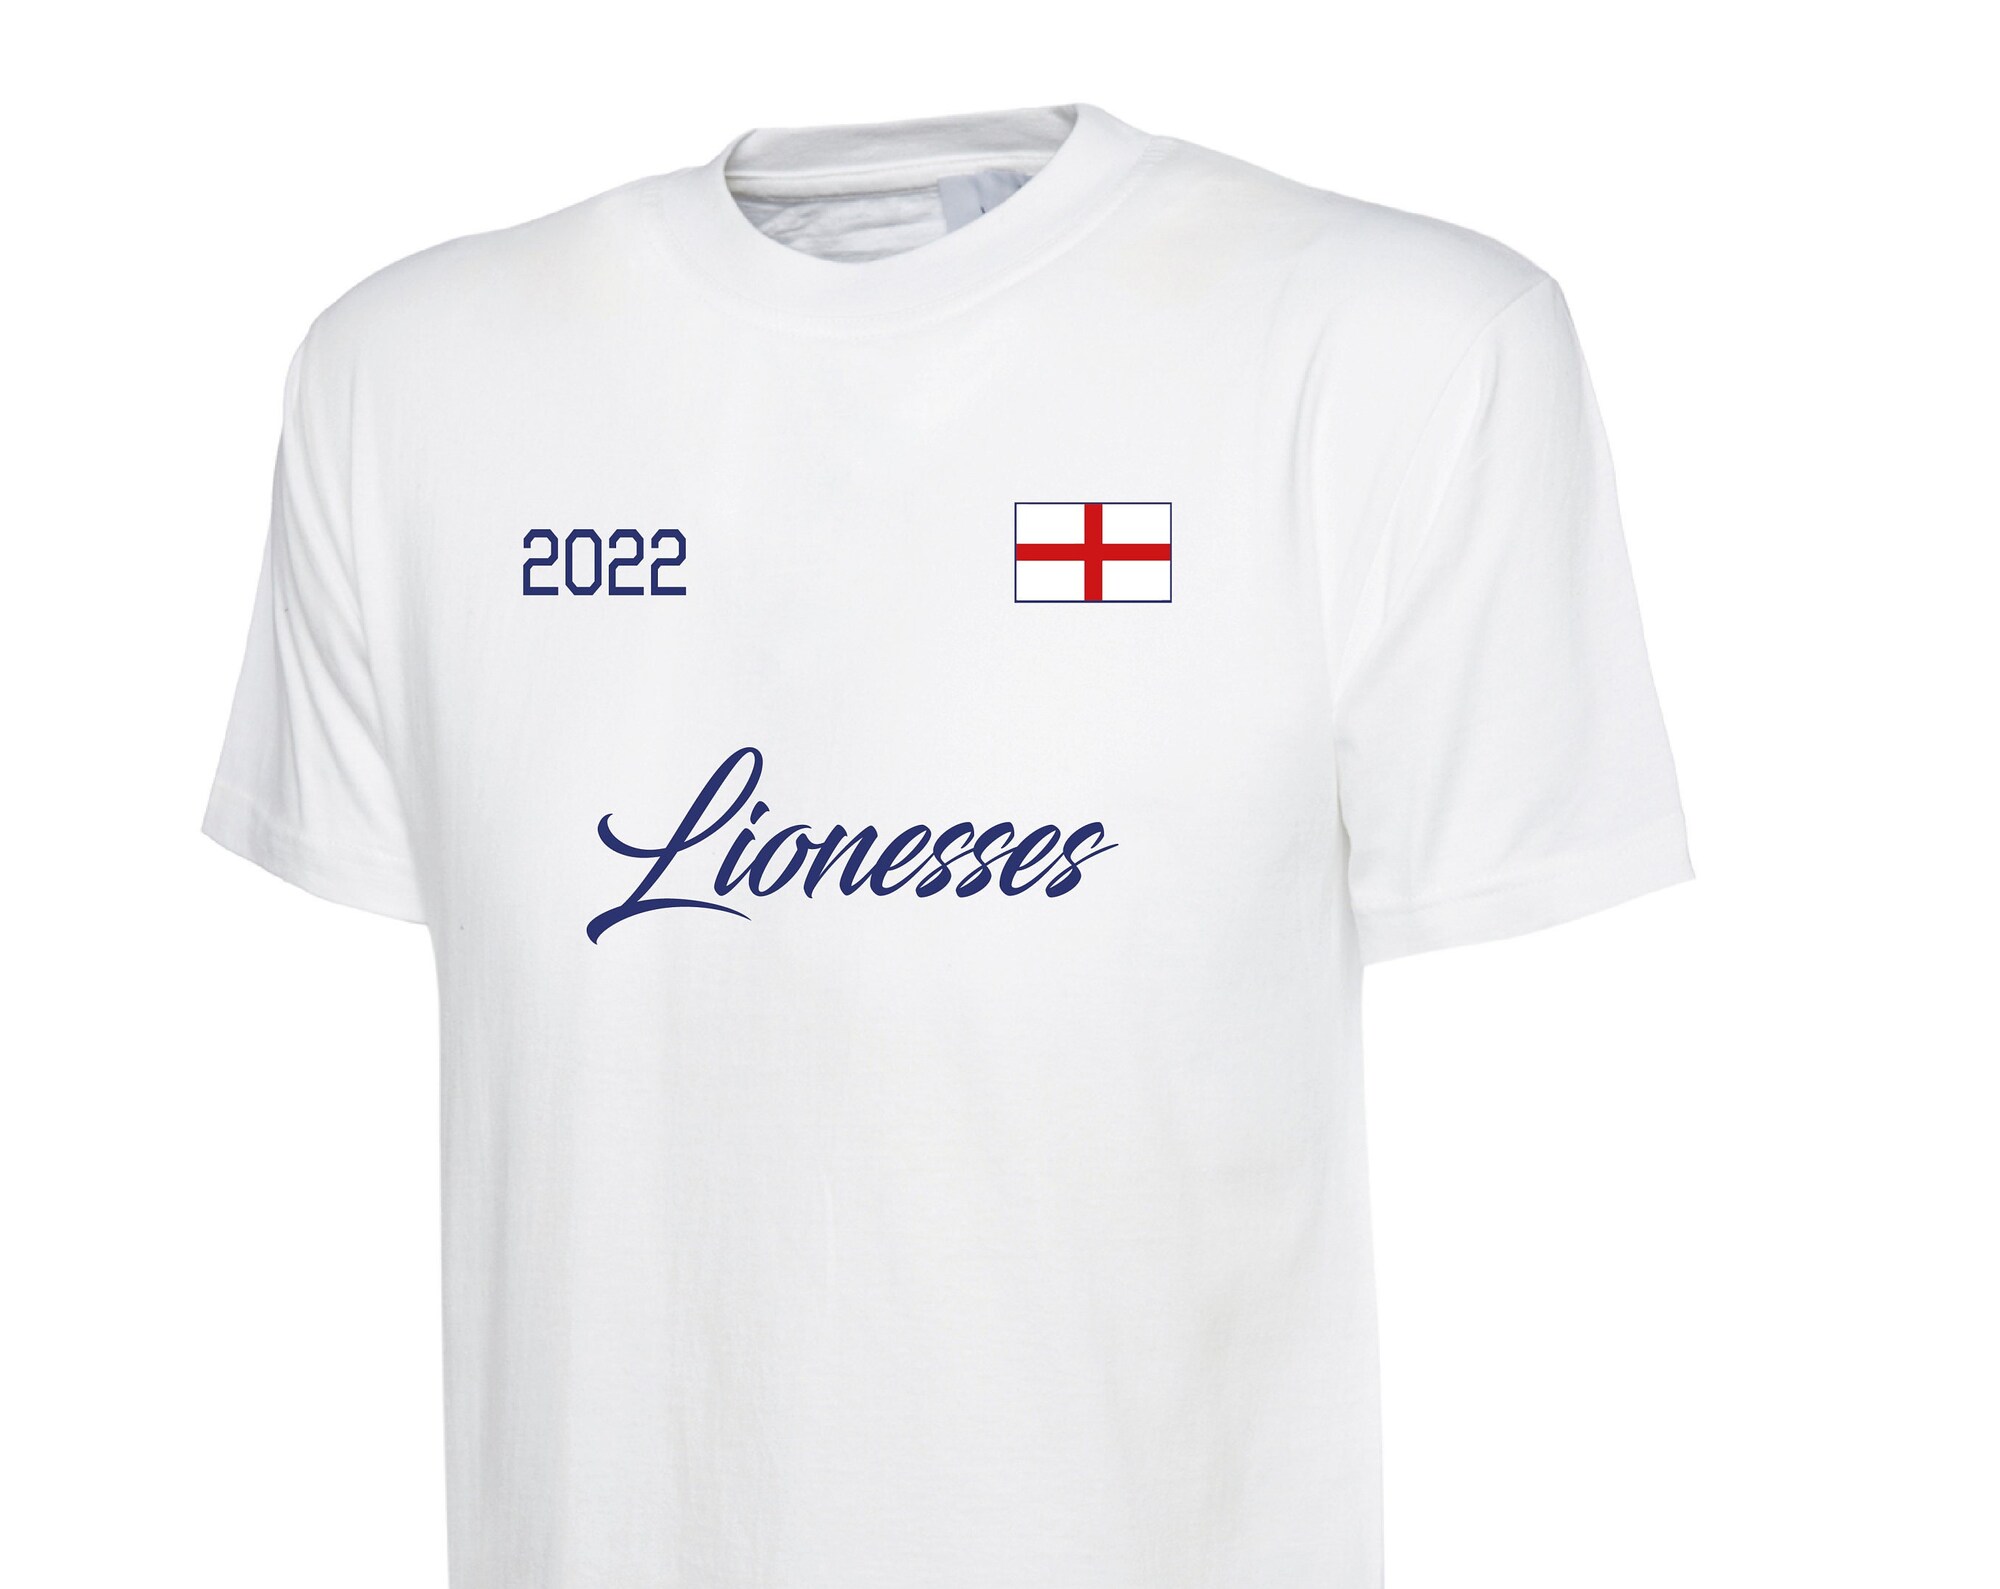 Discover England Euro 2022 Lionesses Football T-shirts - Women's Euro 2022 Champions, Euro Kit, England Flag, Unisex & Kids T-Shirts, It Came home